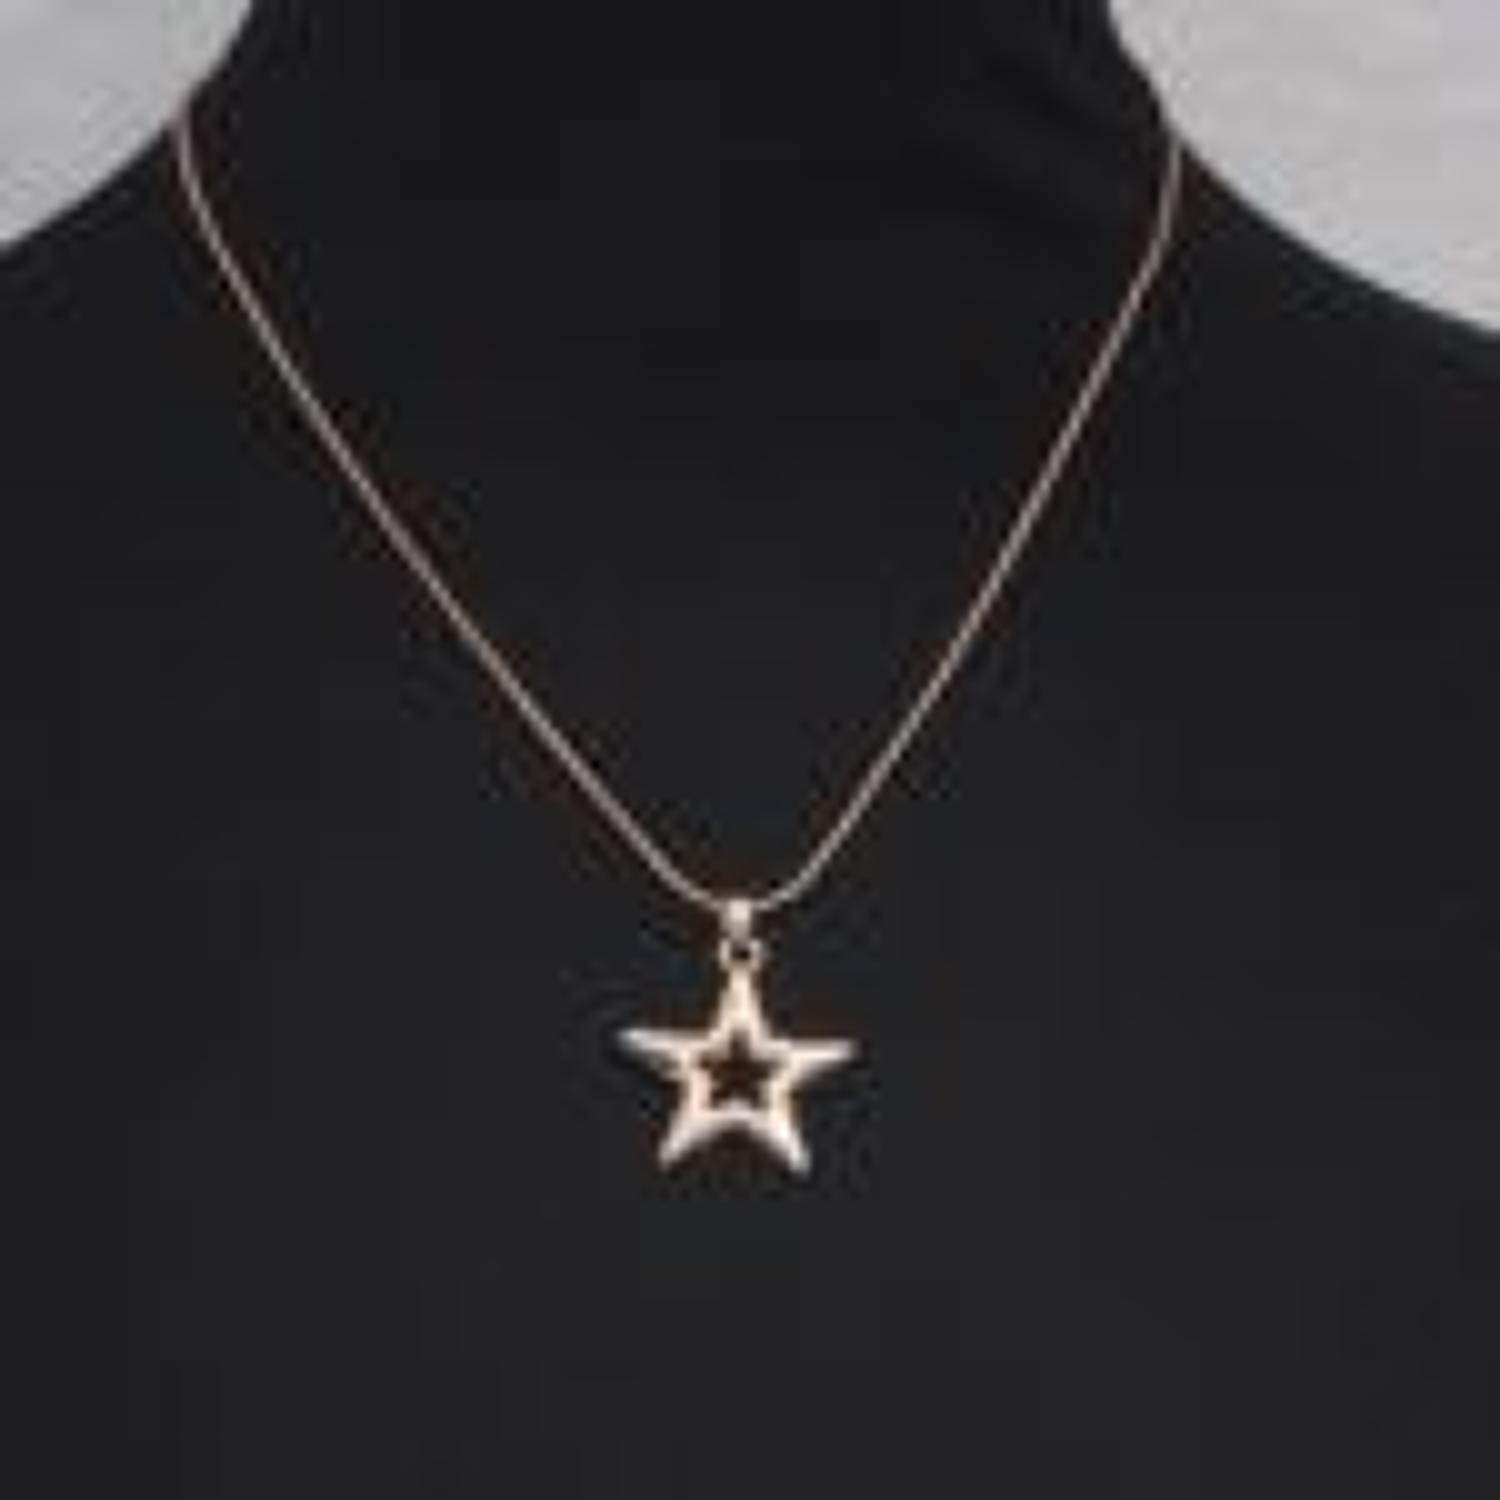 J & L - Short necklace with rose gold star pendant